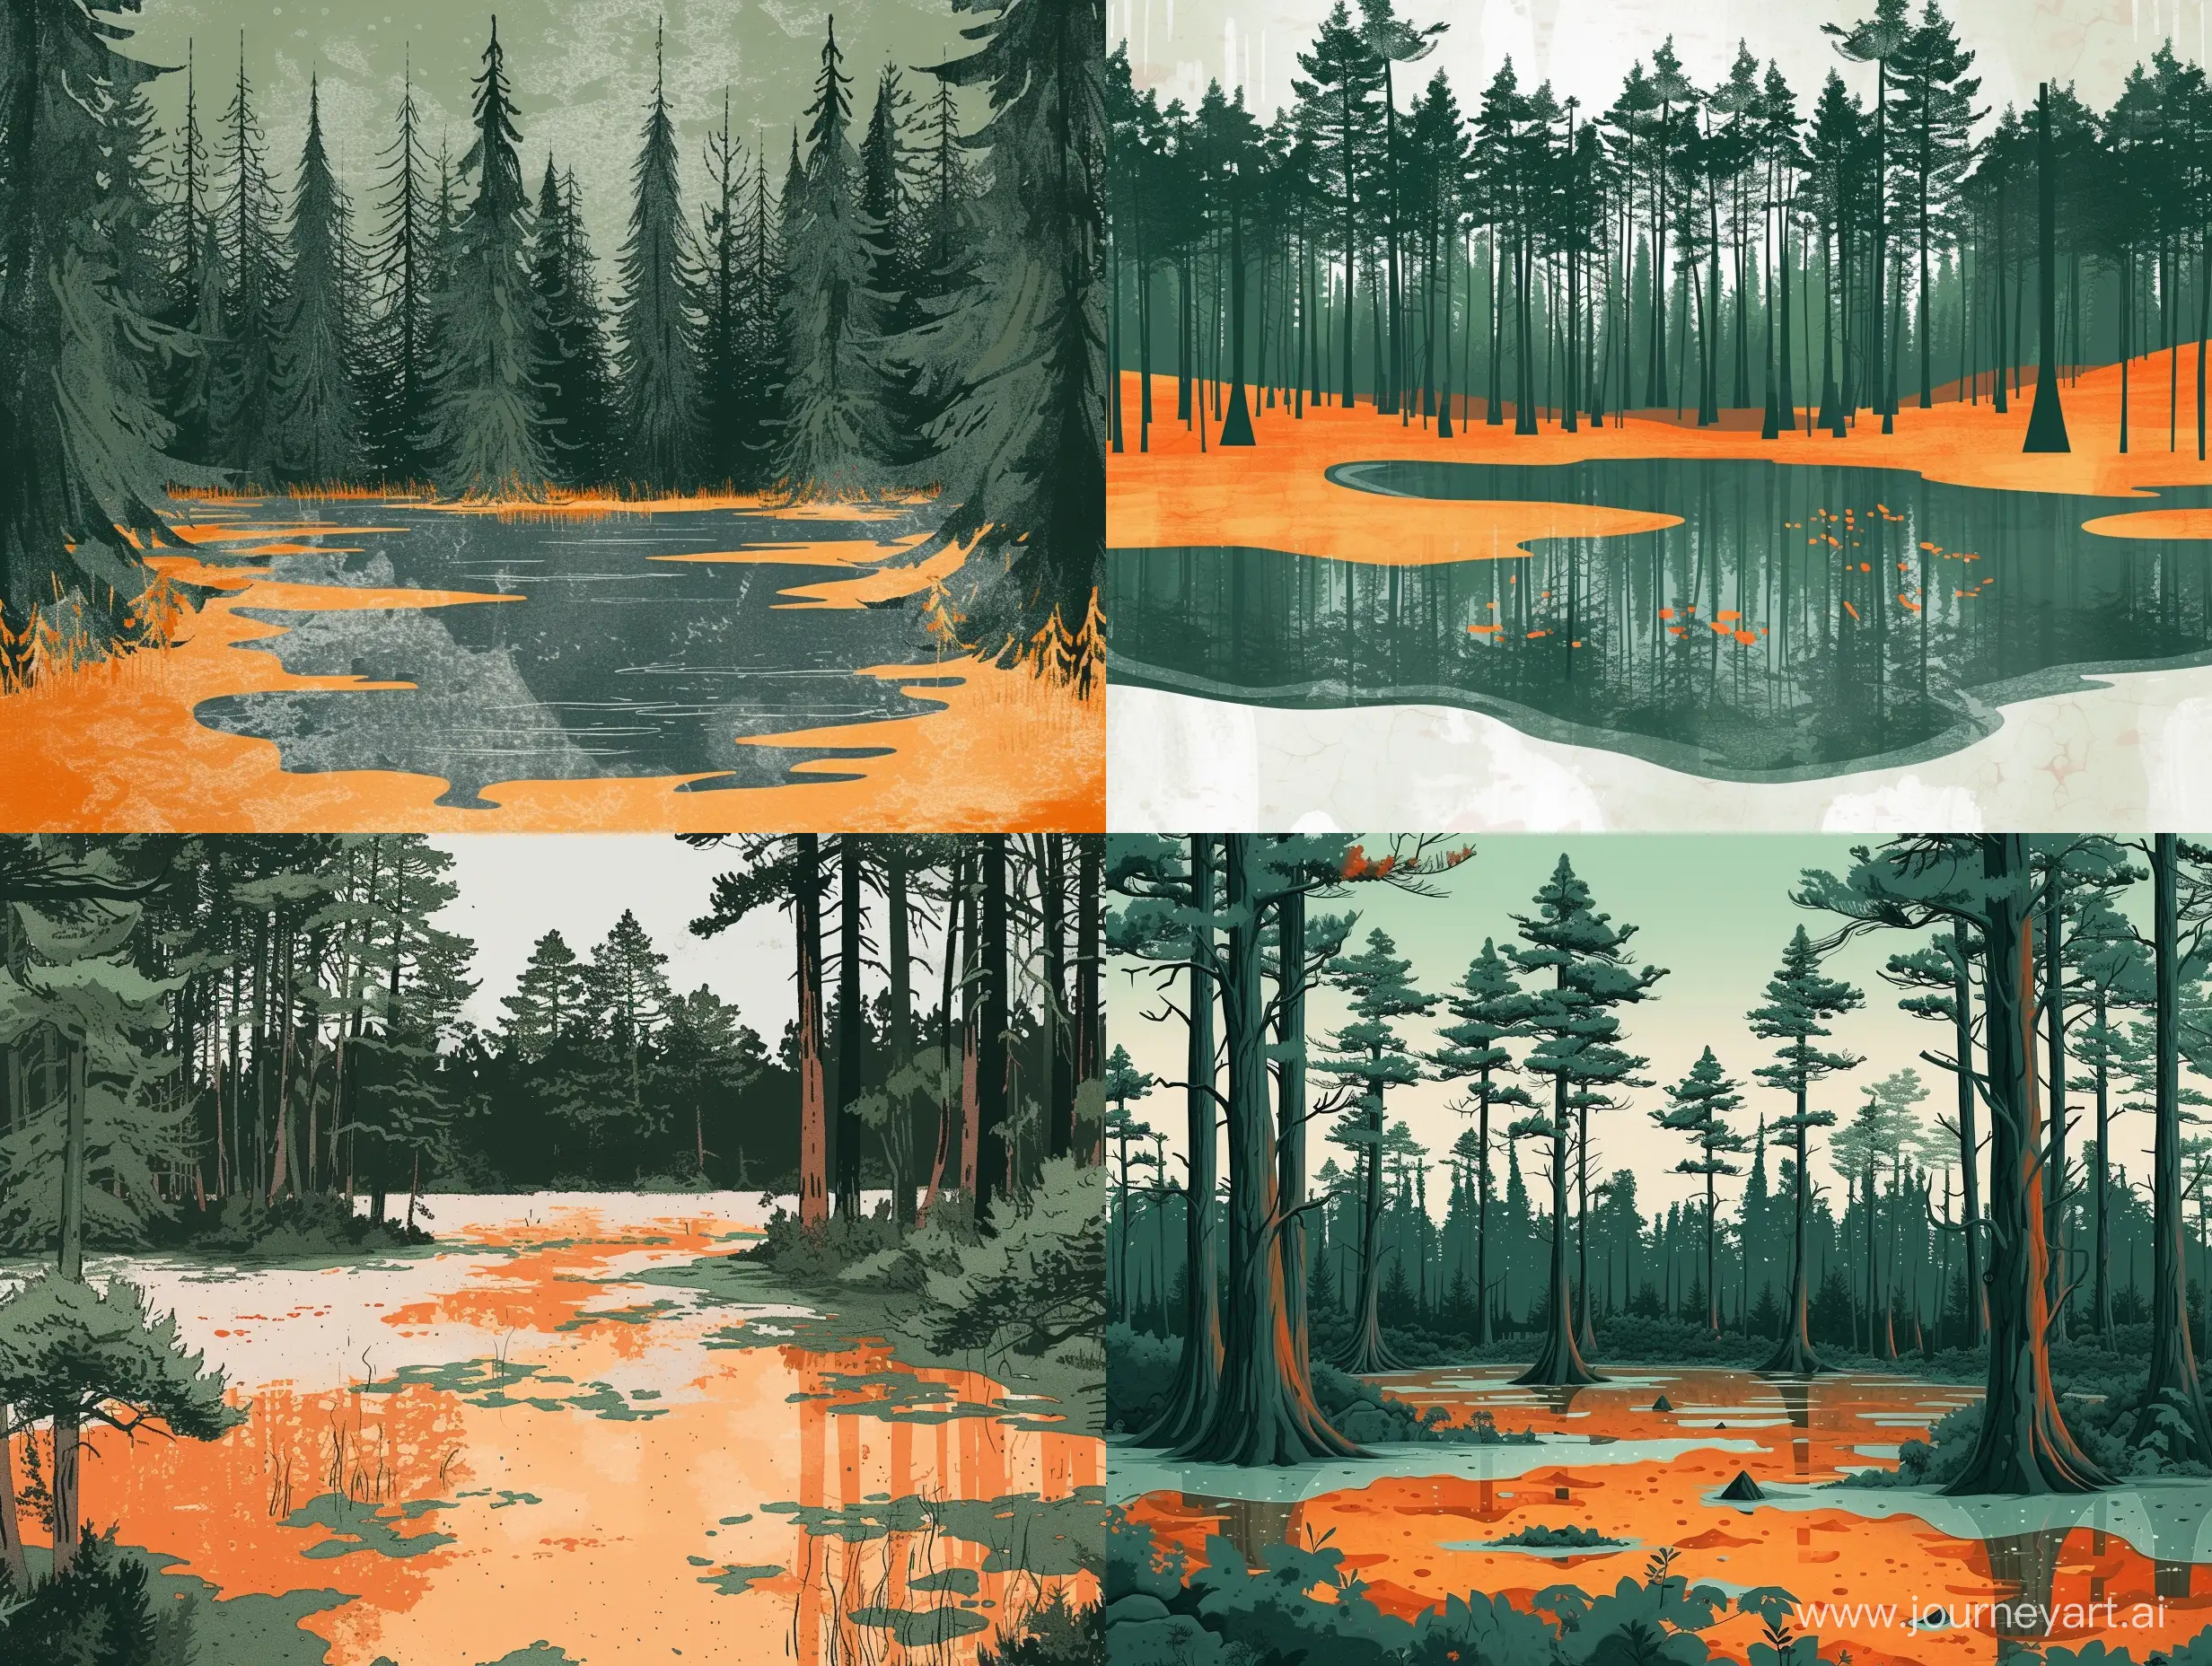 Pine forest in a swamp in the style of an old illustration in salt, dark green and orange shades